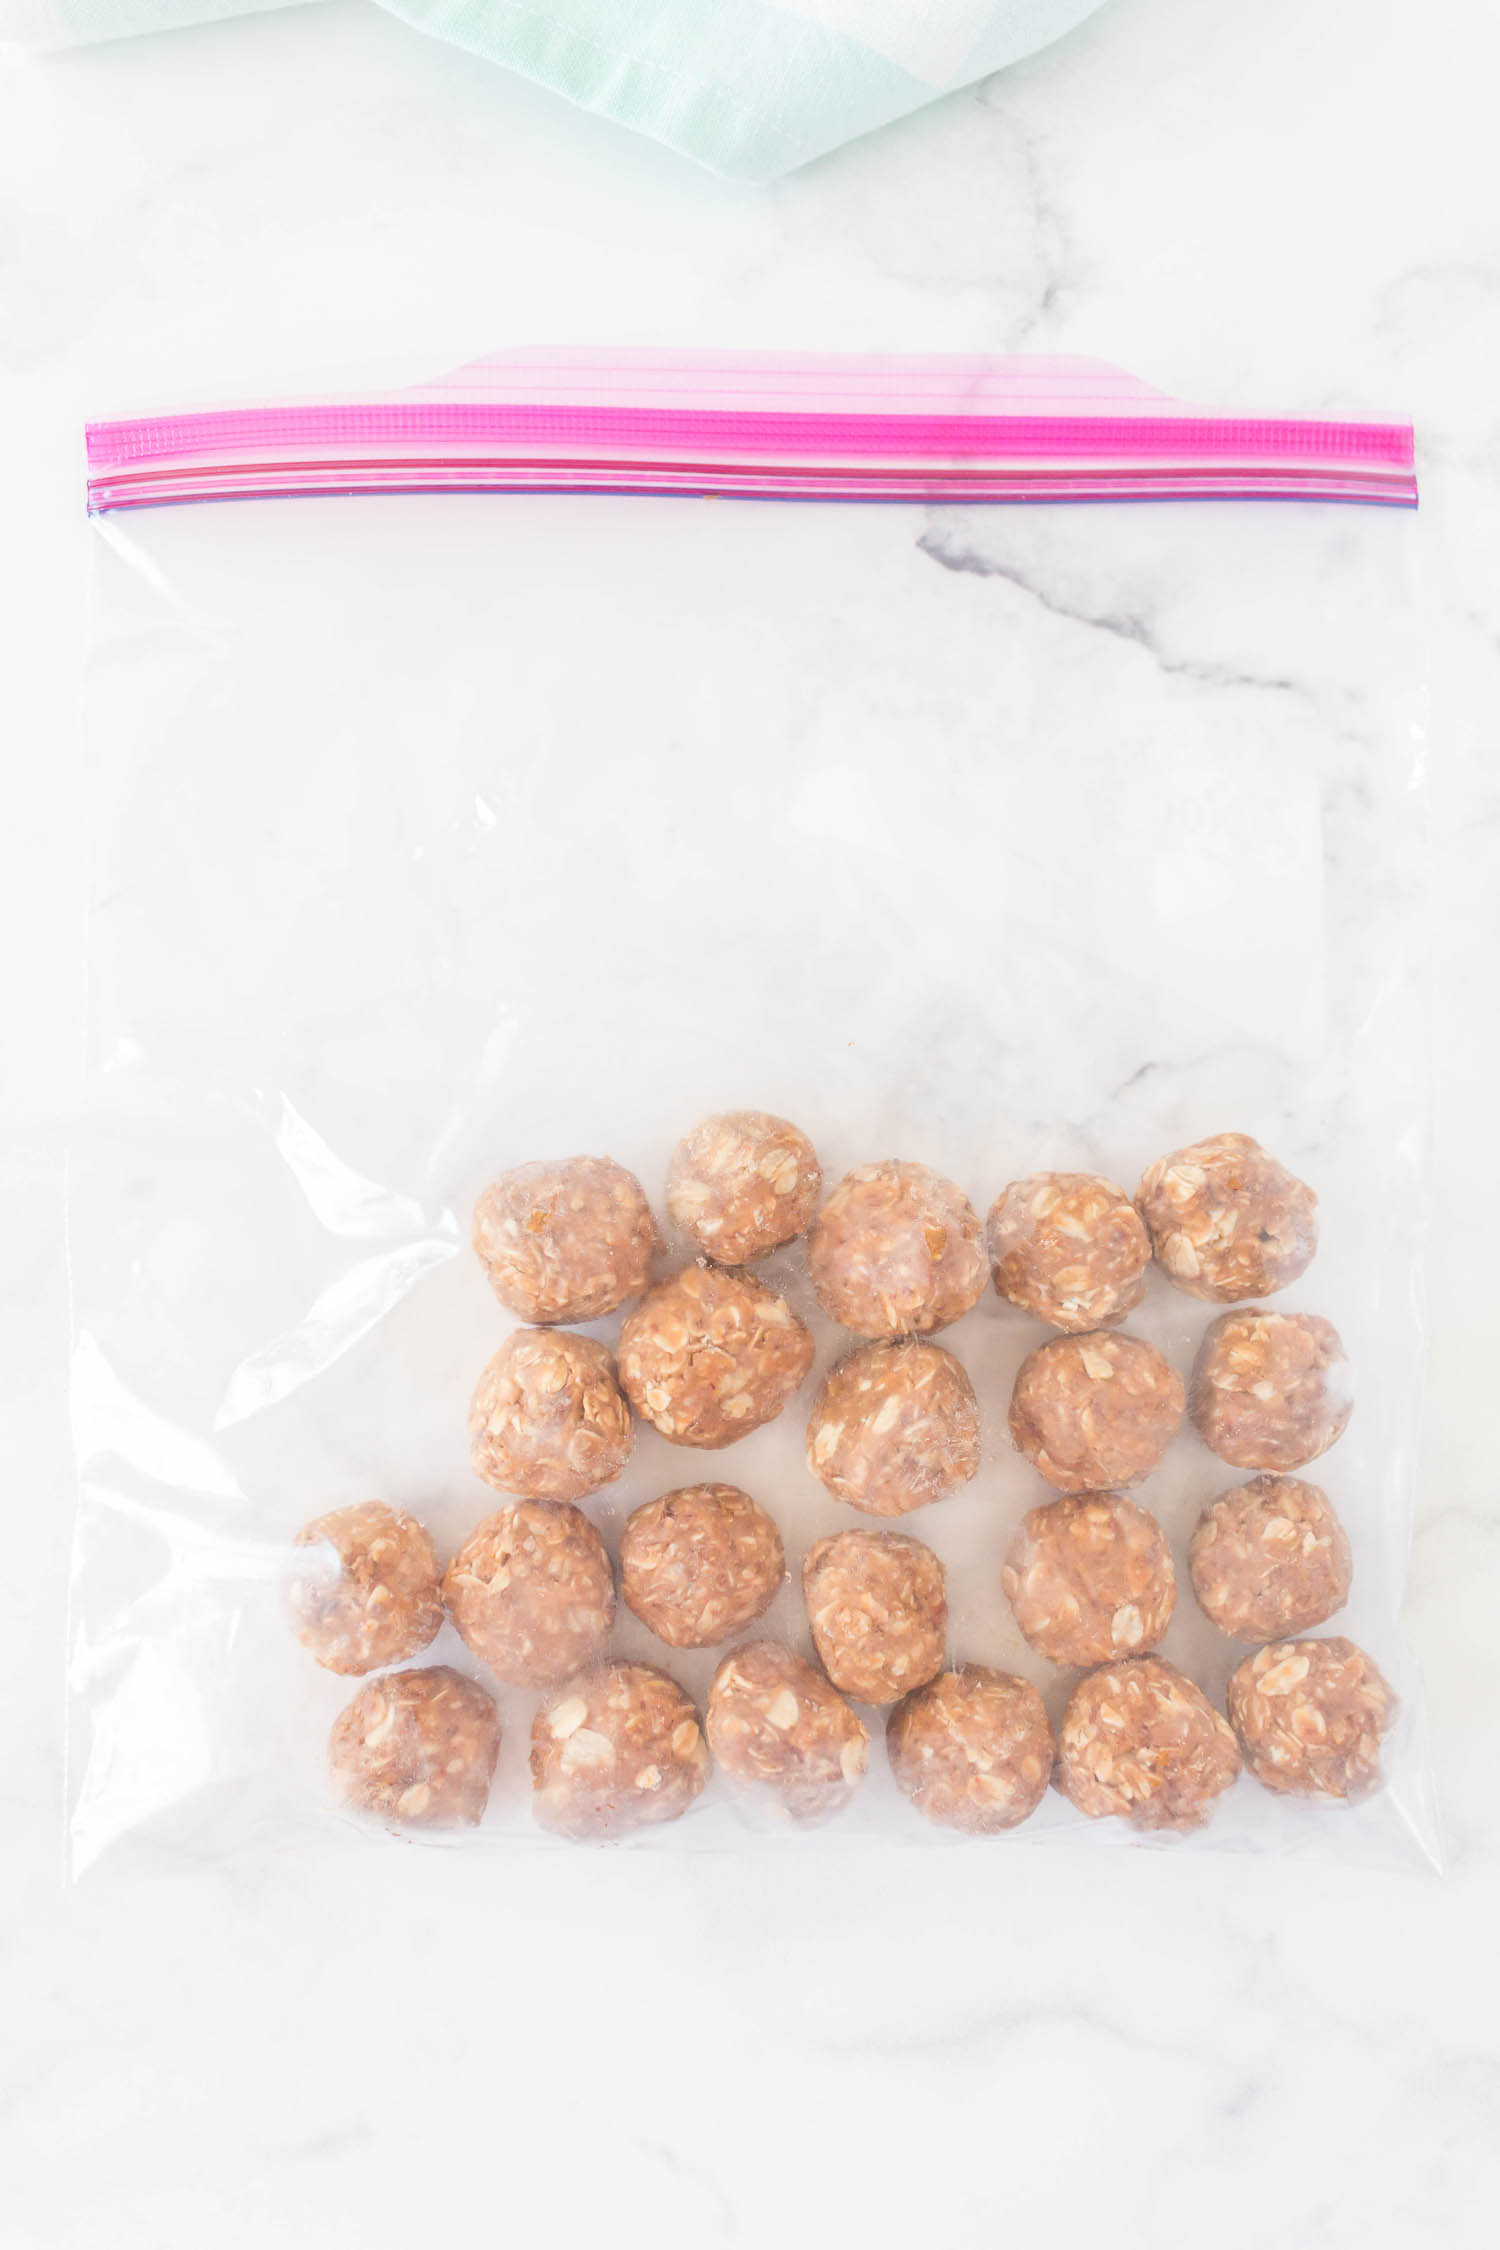 A large resealable bag with energy balls in it on a white counter.